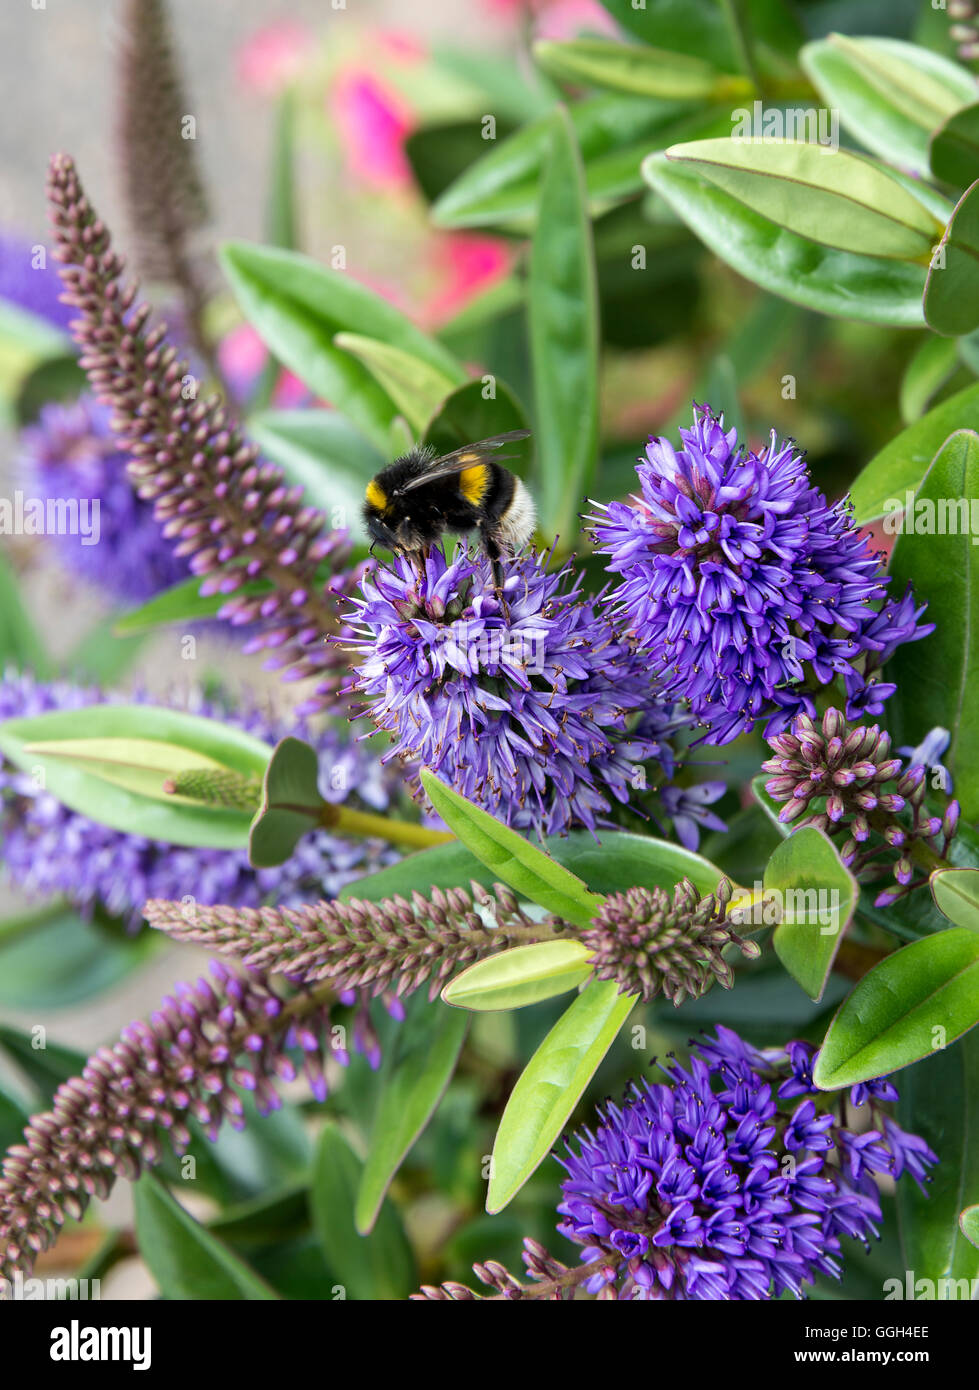 A Solitary Bumble Bee Feeding on a Blue Spiked Hebe Flower Donna in a Garden Alsager Cheshire England United Kingdom UK Stock Photo